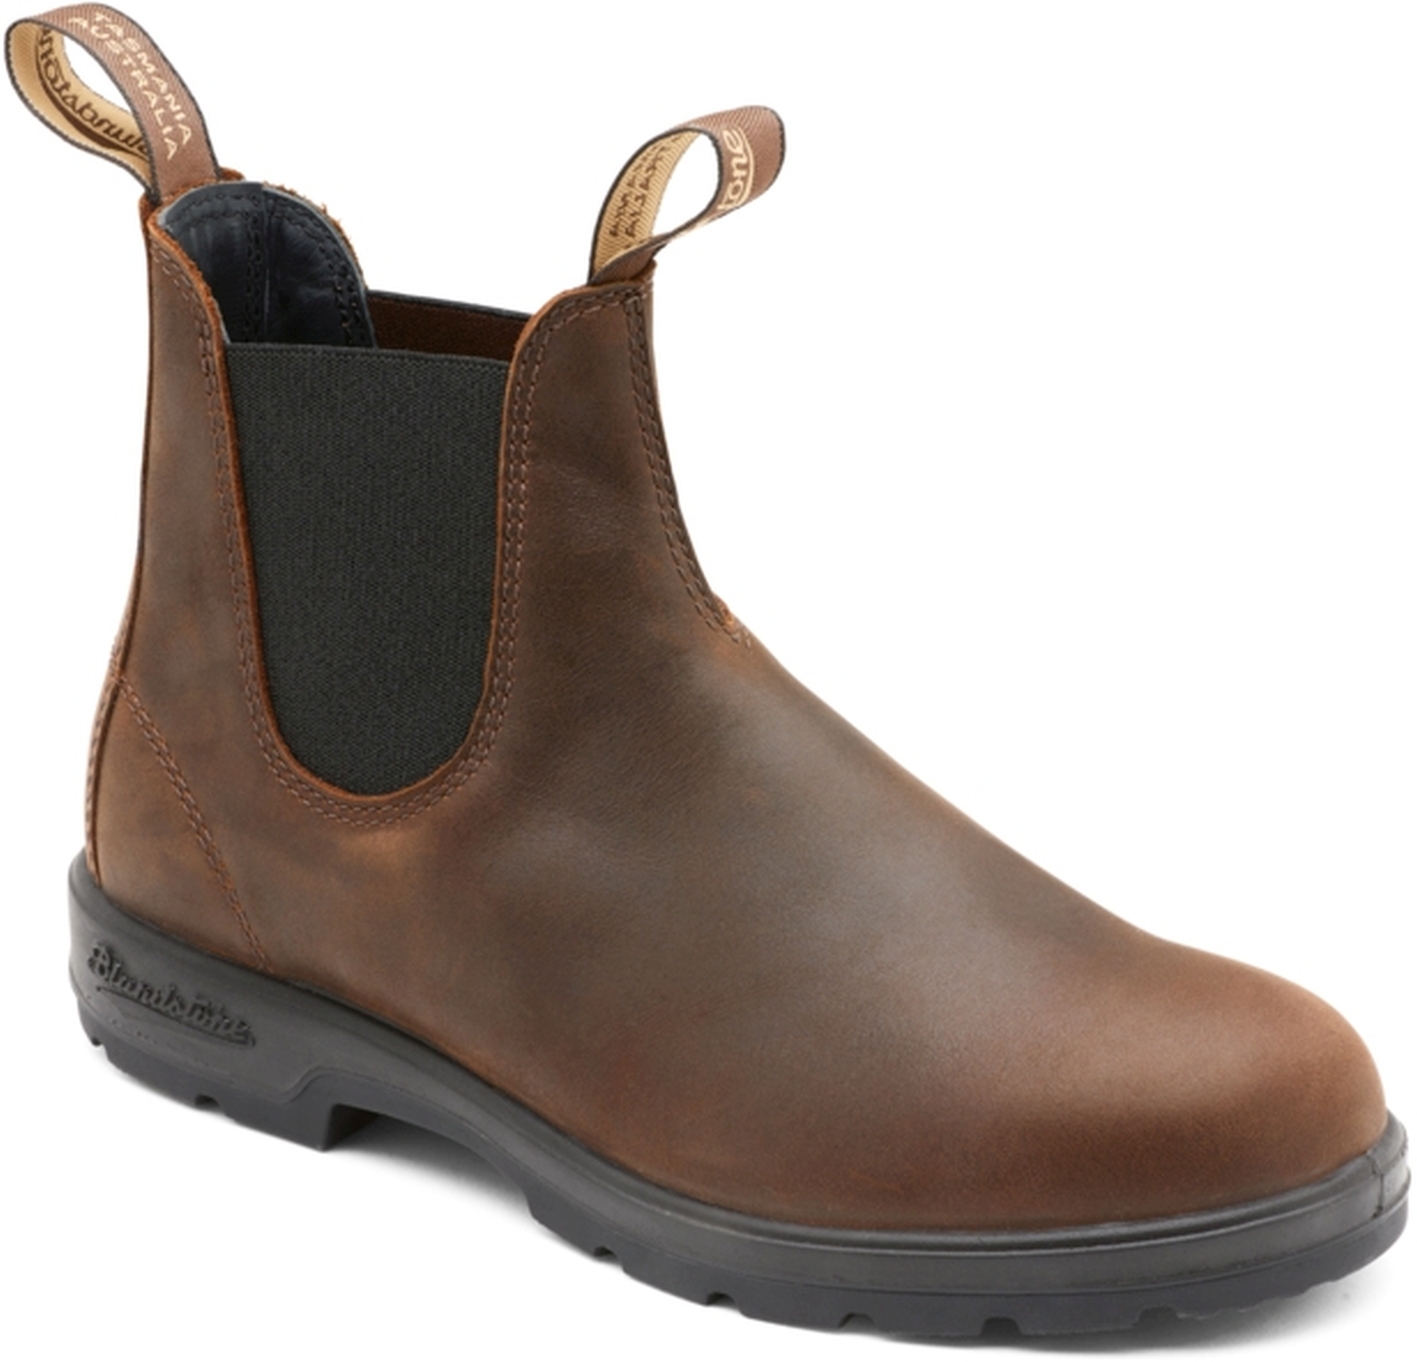 Blundstone 1609 Antique Brown Leather (550 Series) Calf leather